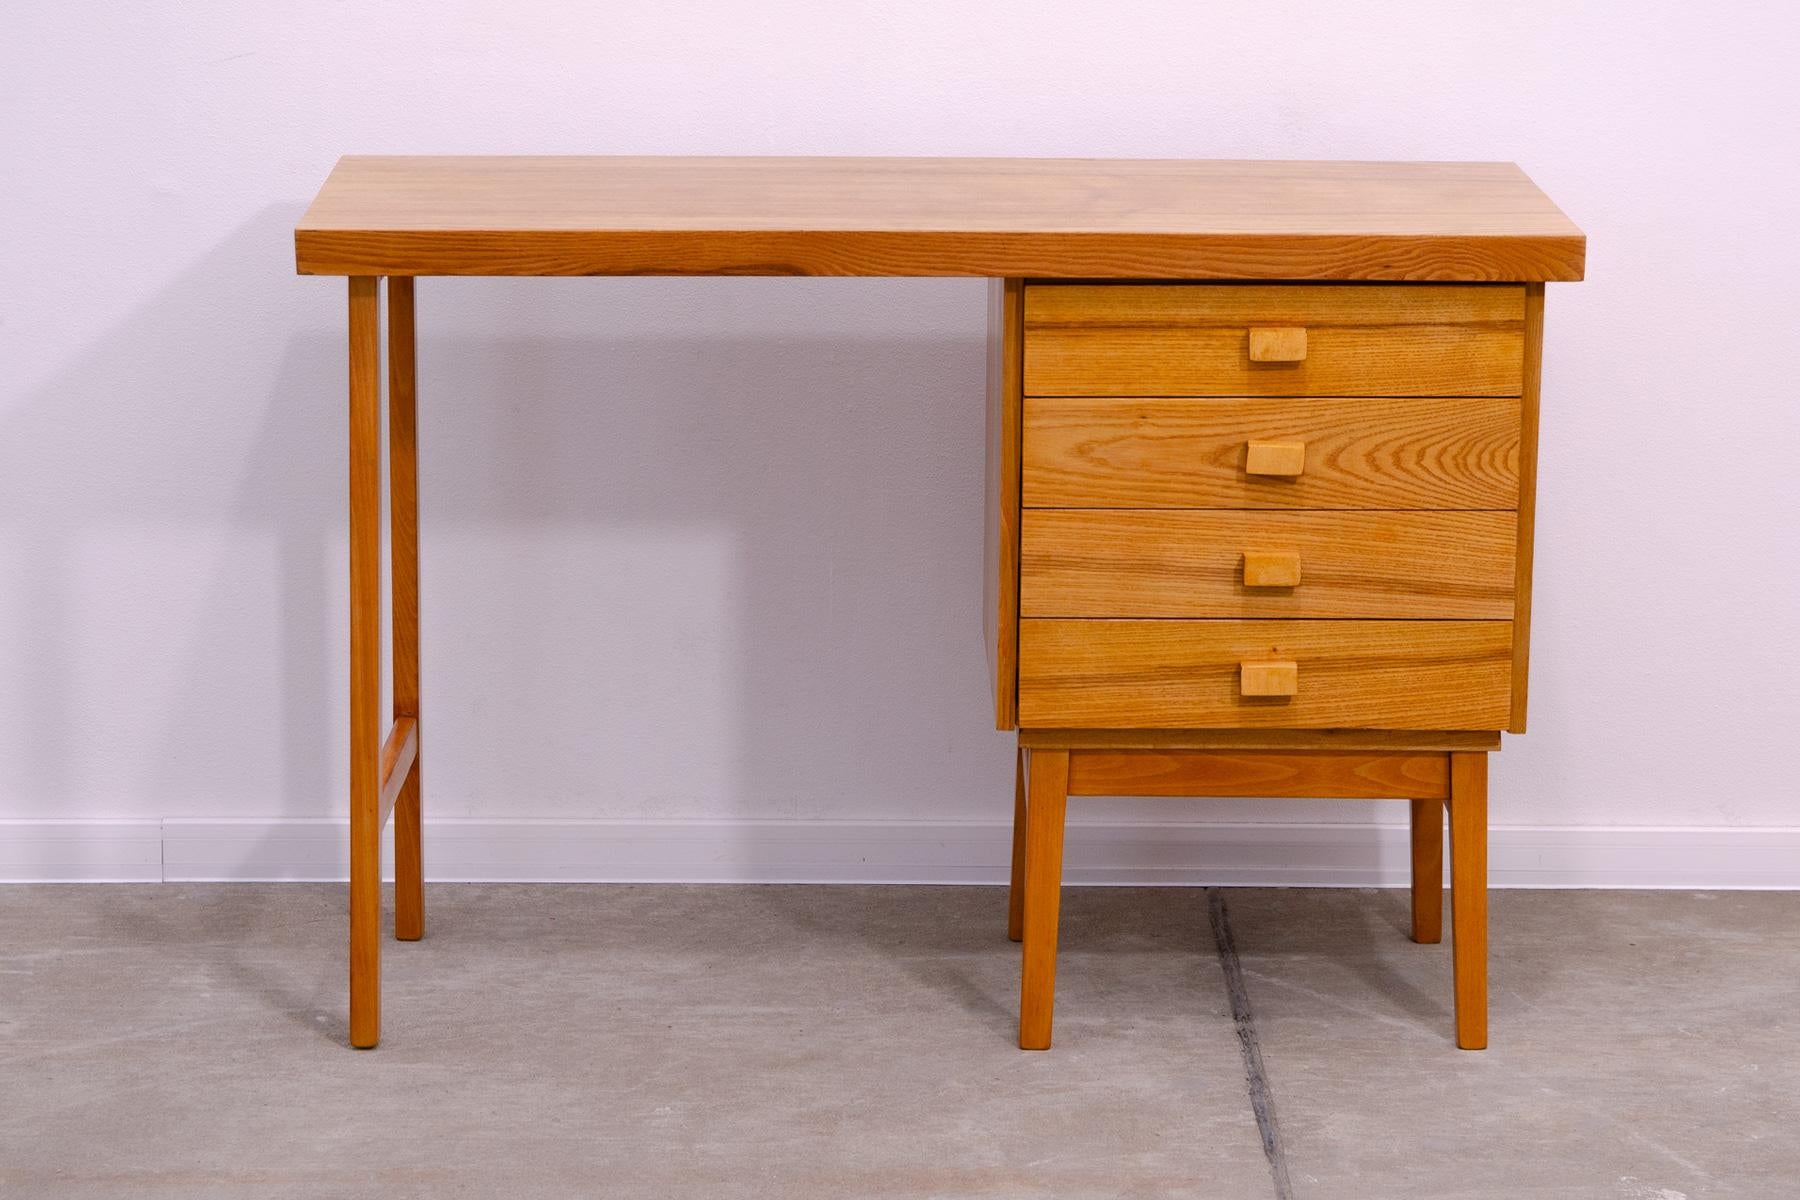 A Simple vintage beech wood writing desk from the HIKOR Písek company, 1970´s, Czechoslovakia
The design is very simple and elegant. It features a section with 4 drawers. The desk has been fully restored and is in excellent condition.

Height: 75